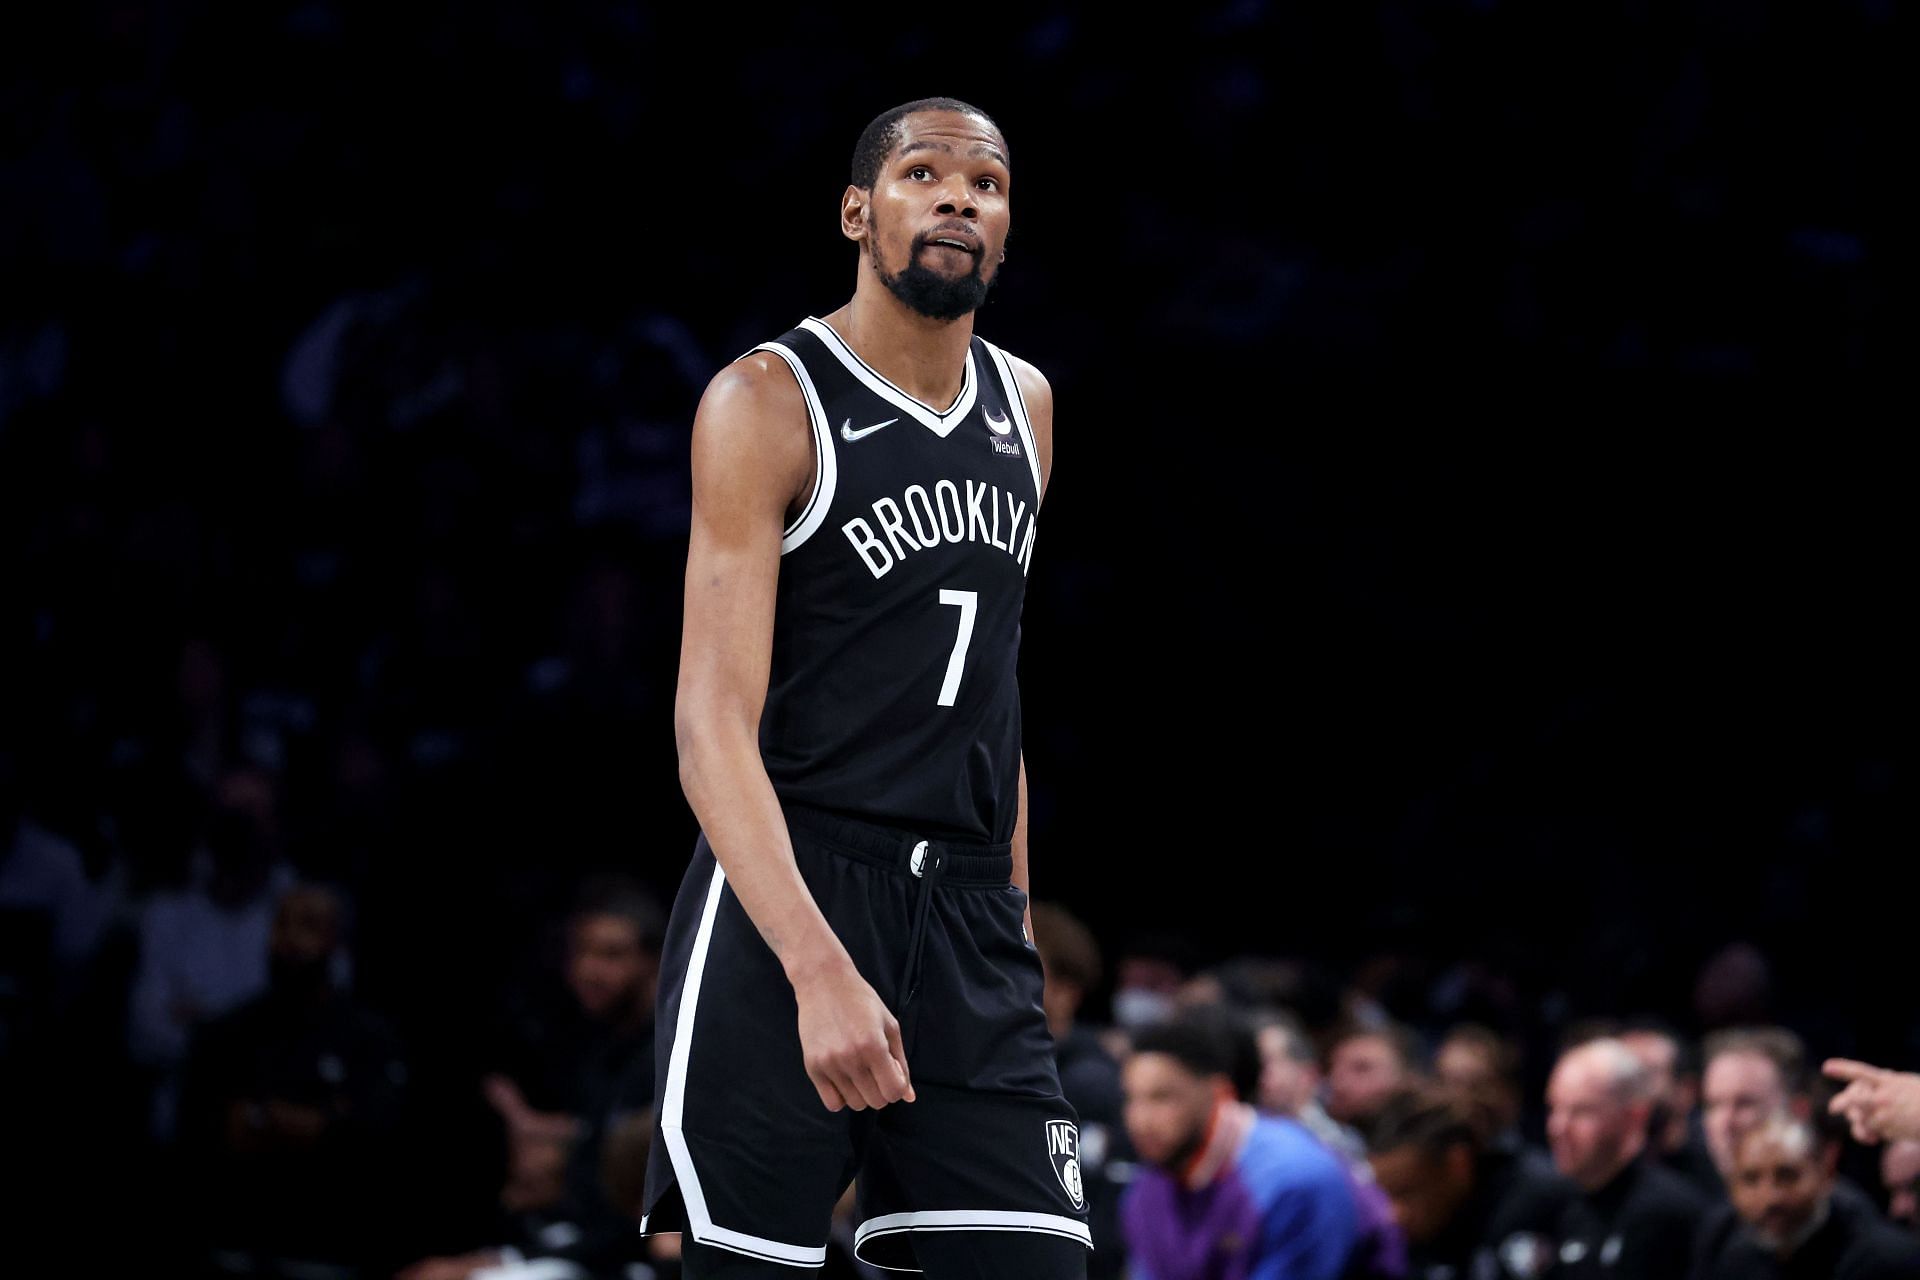 Kevin Durant of the Brooklyn Nets looks on against the Boston Celtics during Game 3 of the first round of the Eastern Conference playoffs at Barclays Center on April 2 in New York City.